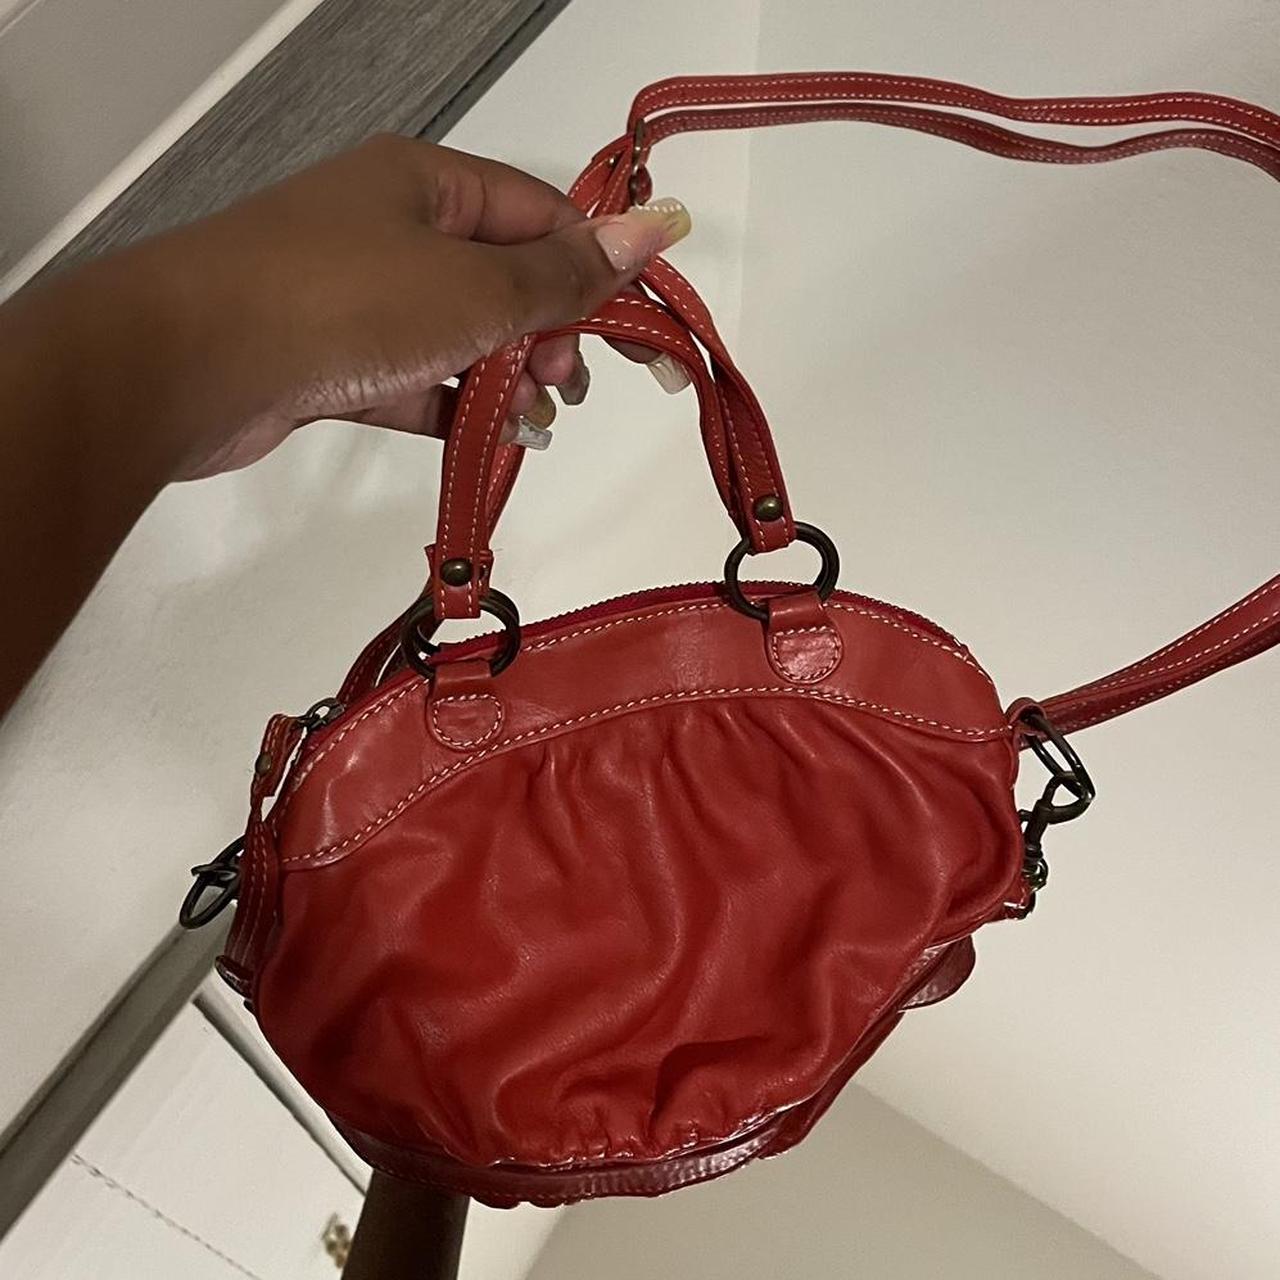 Vintage Saks Fifth Avenue Handbags Red Leather Crossbody Bag Made in USA  for Sale in St. Petersburg, FL - OfferUp